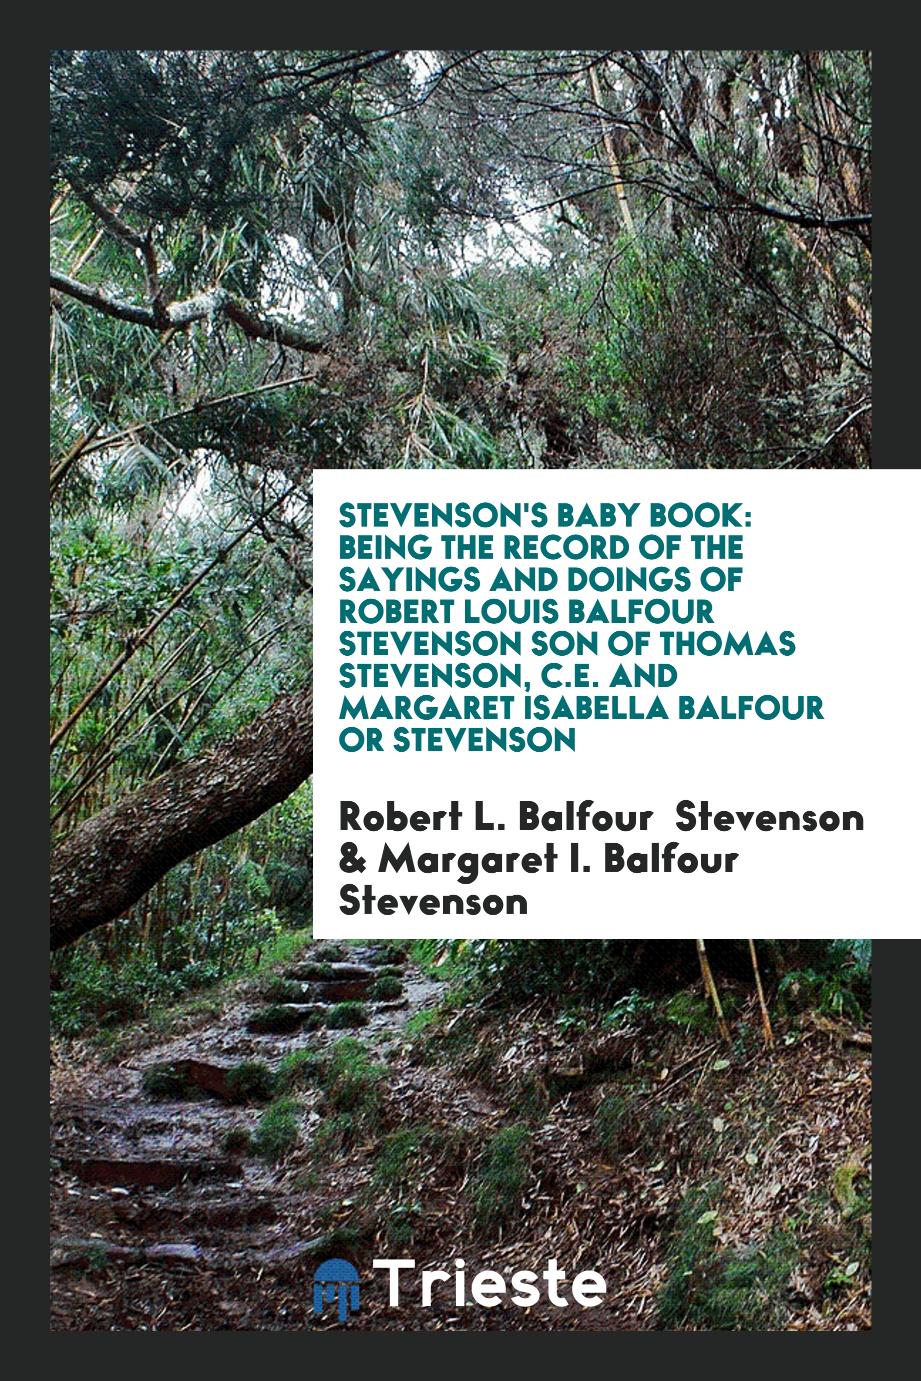 Stevenson's Baby Book: Being the Record of the Sayings and Doings of Robert Louis Balfour Stevenson son of Thomas Stevenson, C.E. and Margaret Isabella Balfour or Stevenson